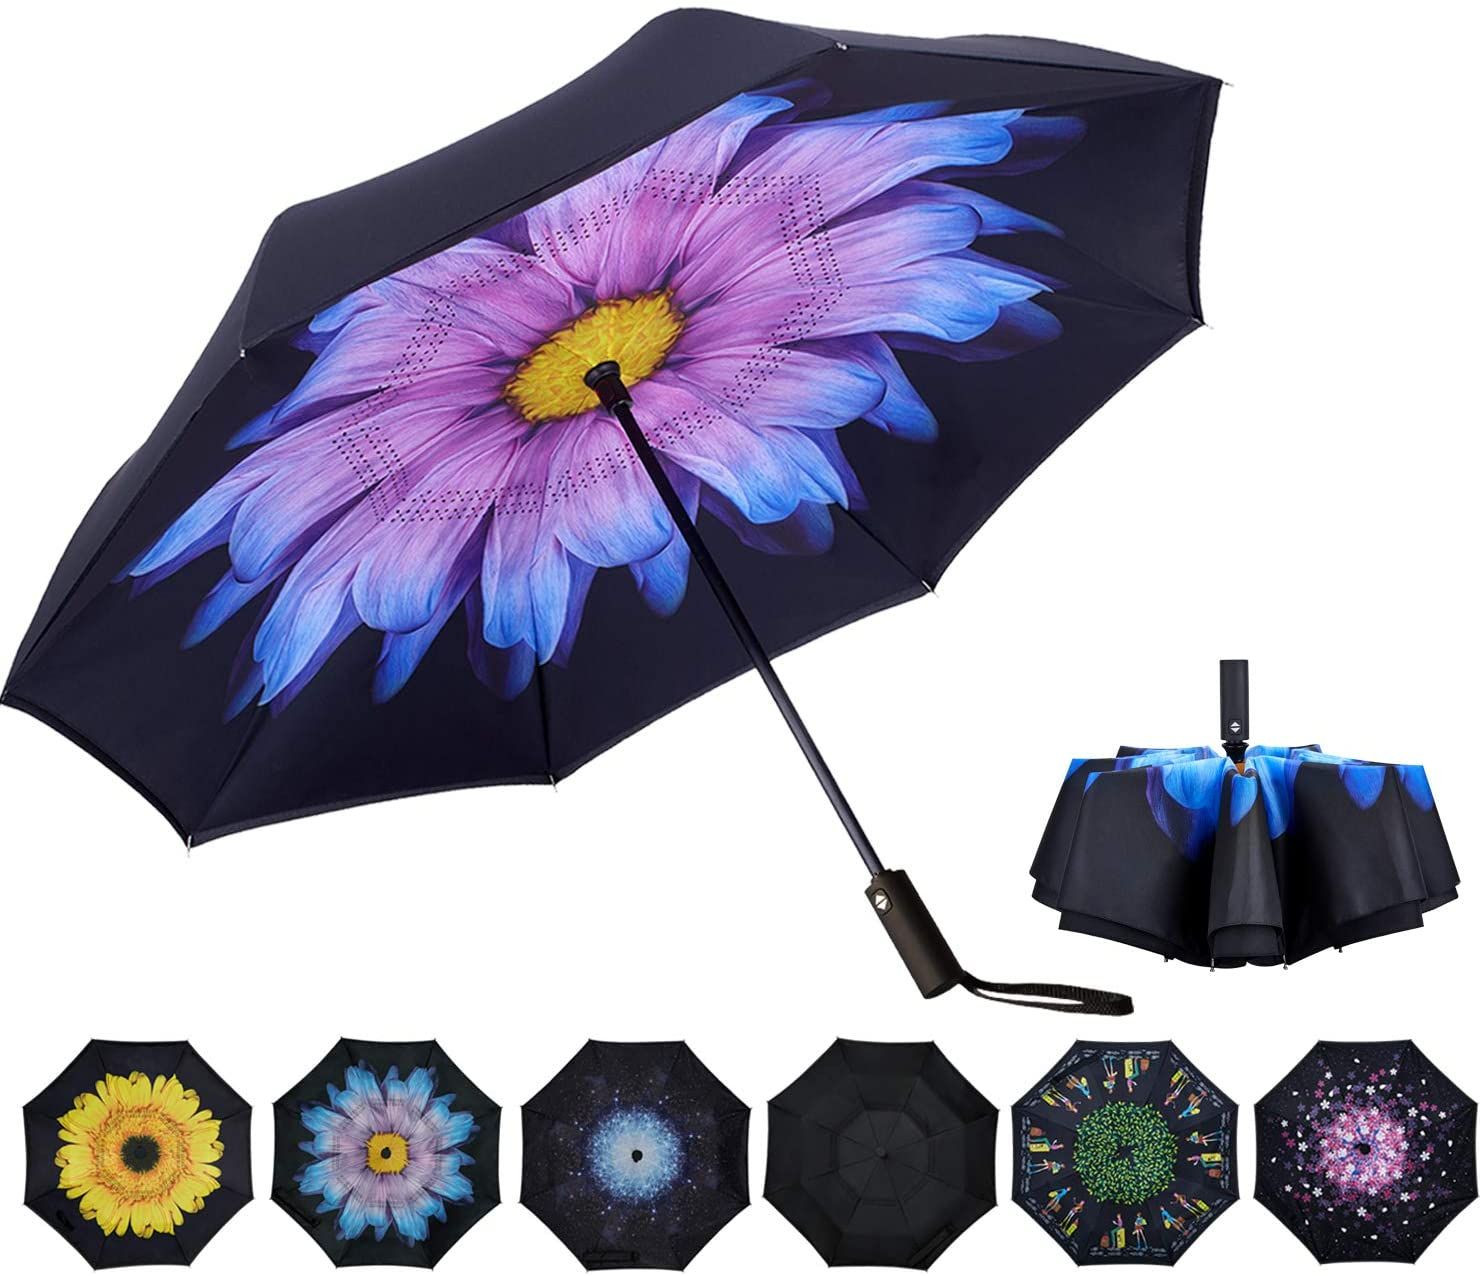 23 inch 8 ribs 3 fold umbrella for promotional